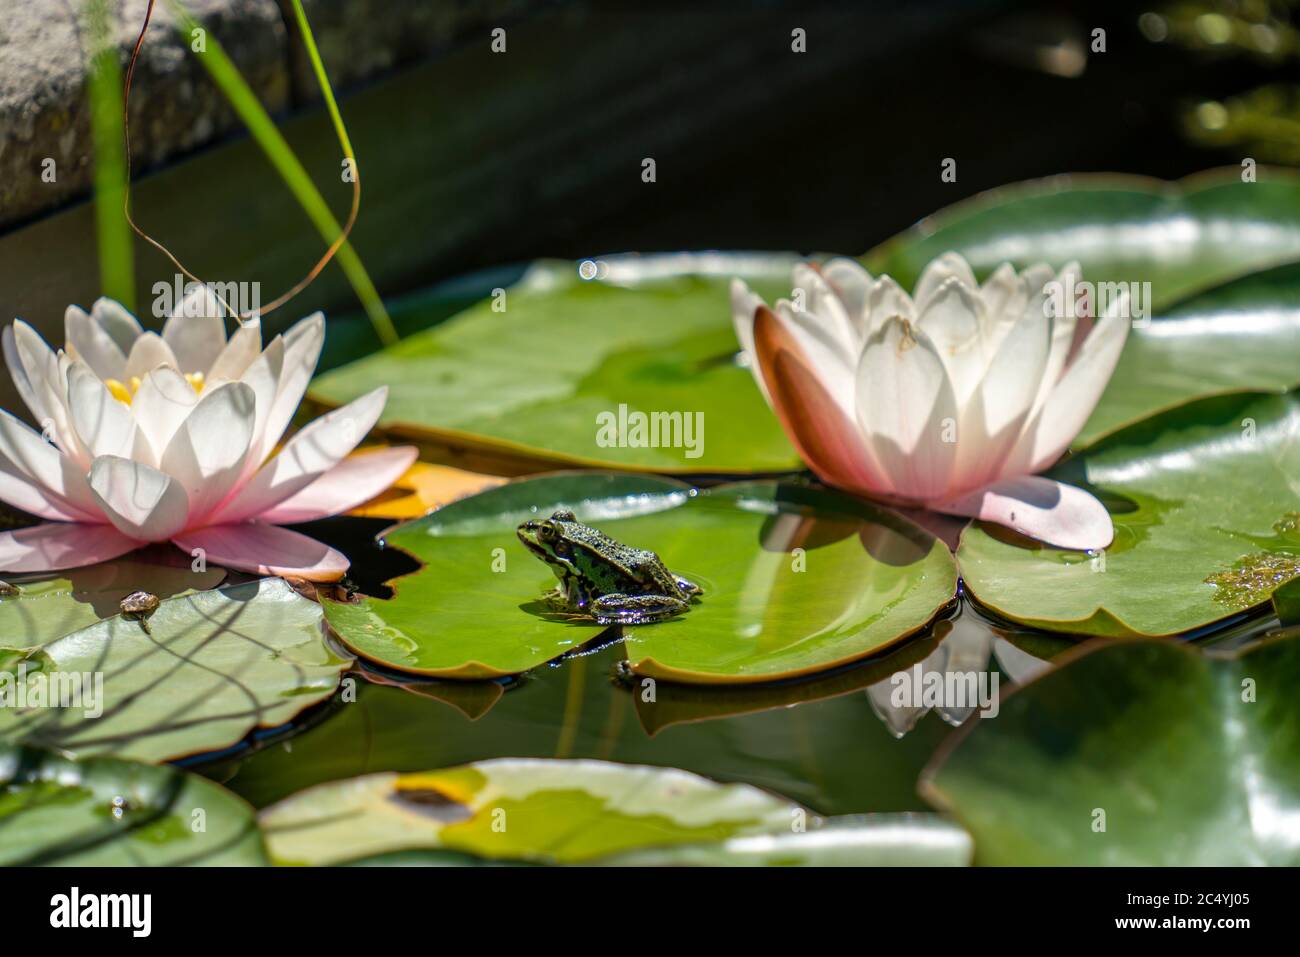 Small water frog, Pelophylax lessonae, in a pond, water lily Stock Photo